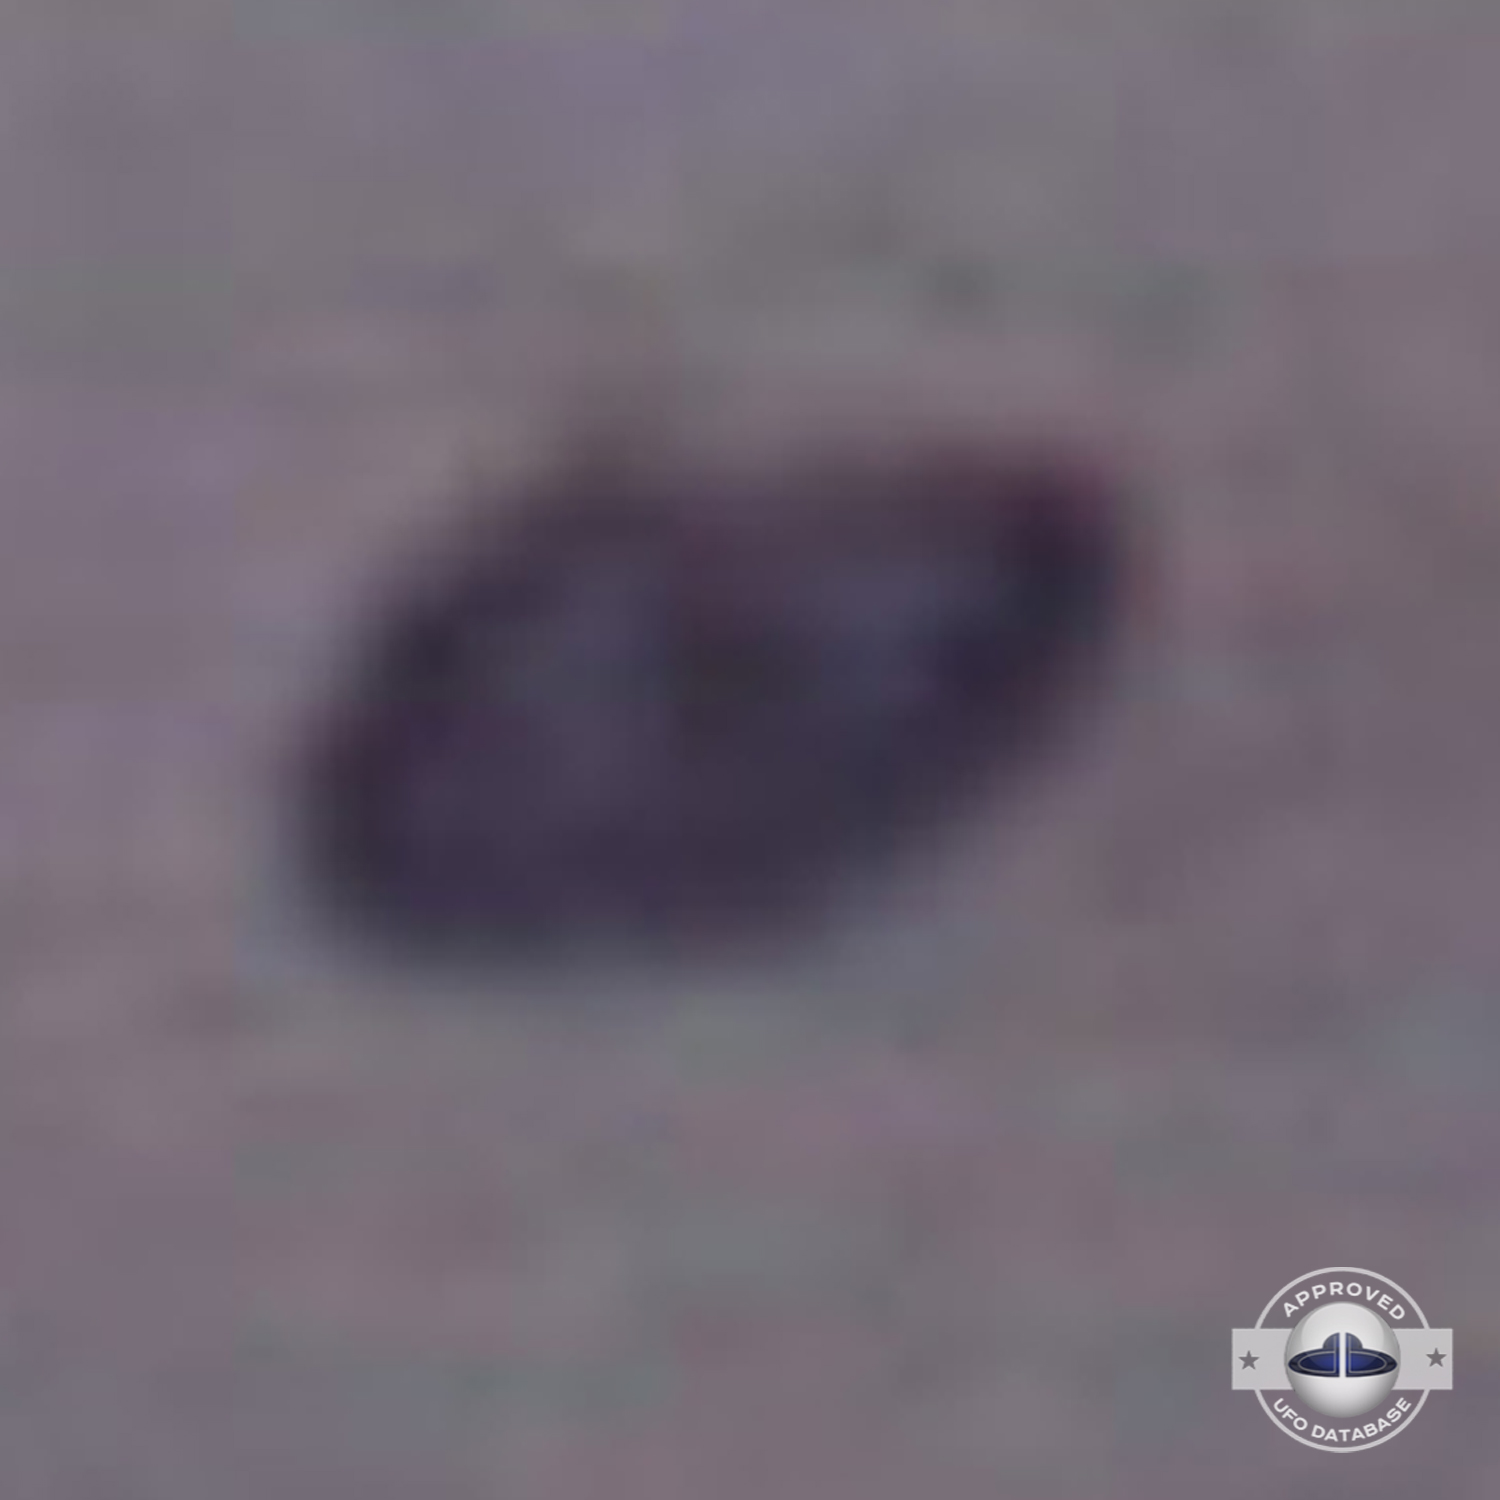 Unidentified flying object is flying over a building with antennas UFO Picture #59-4